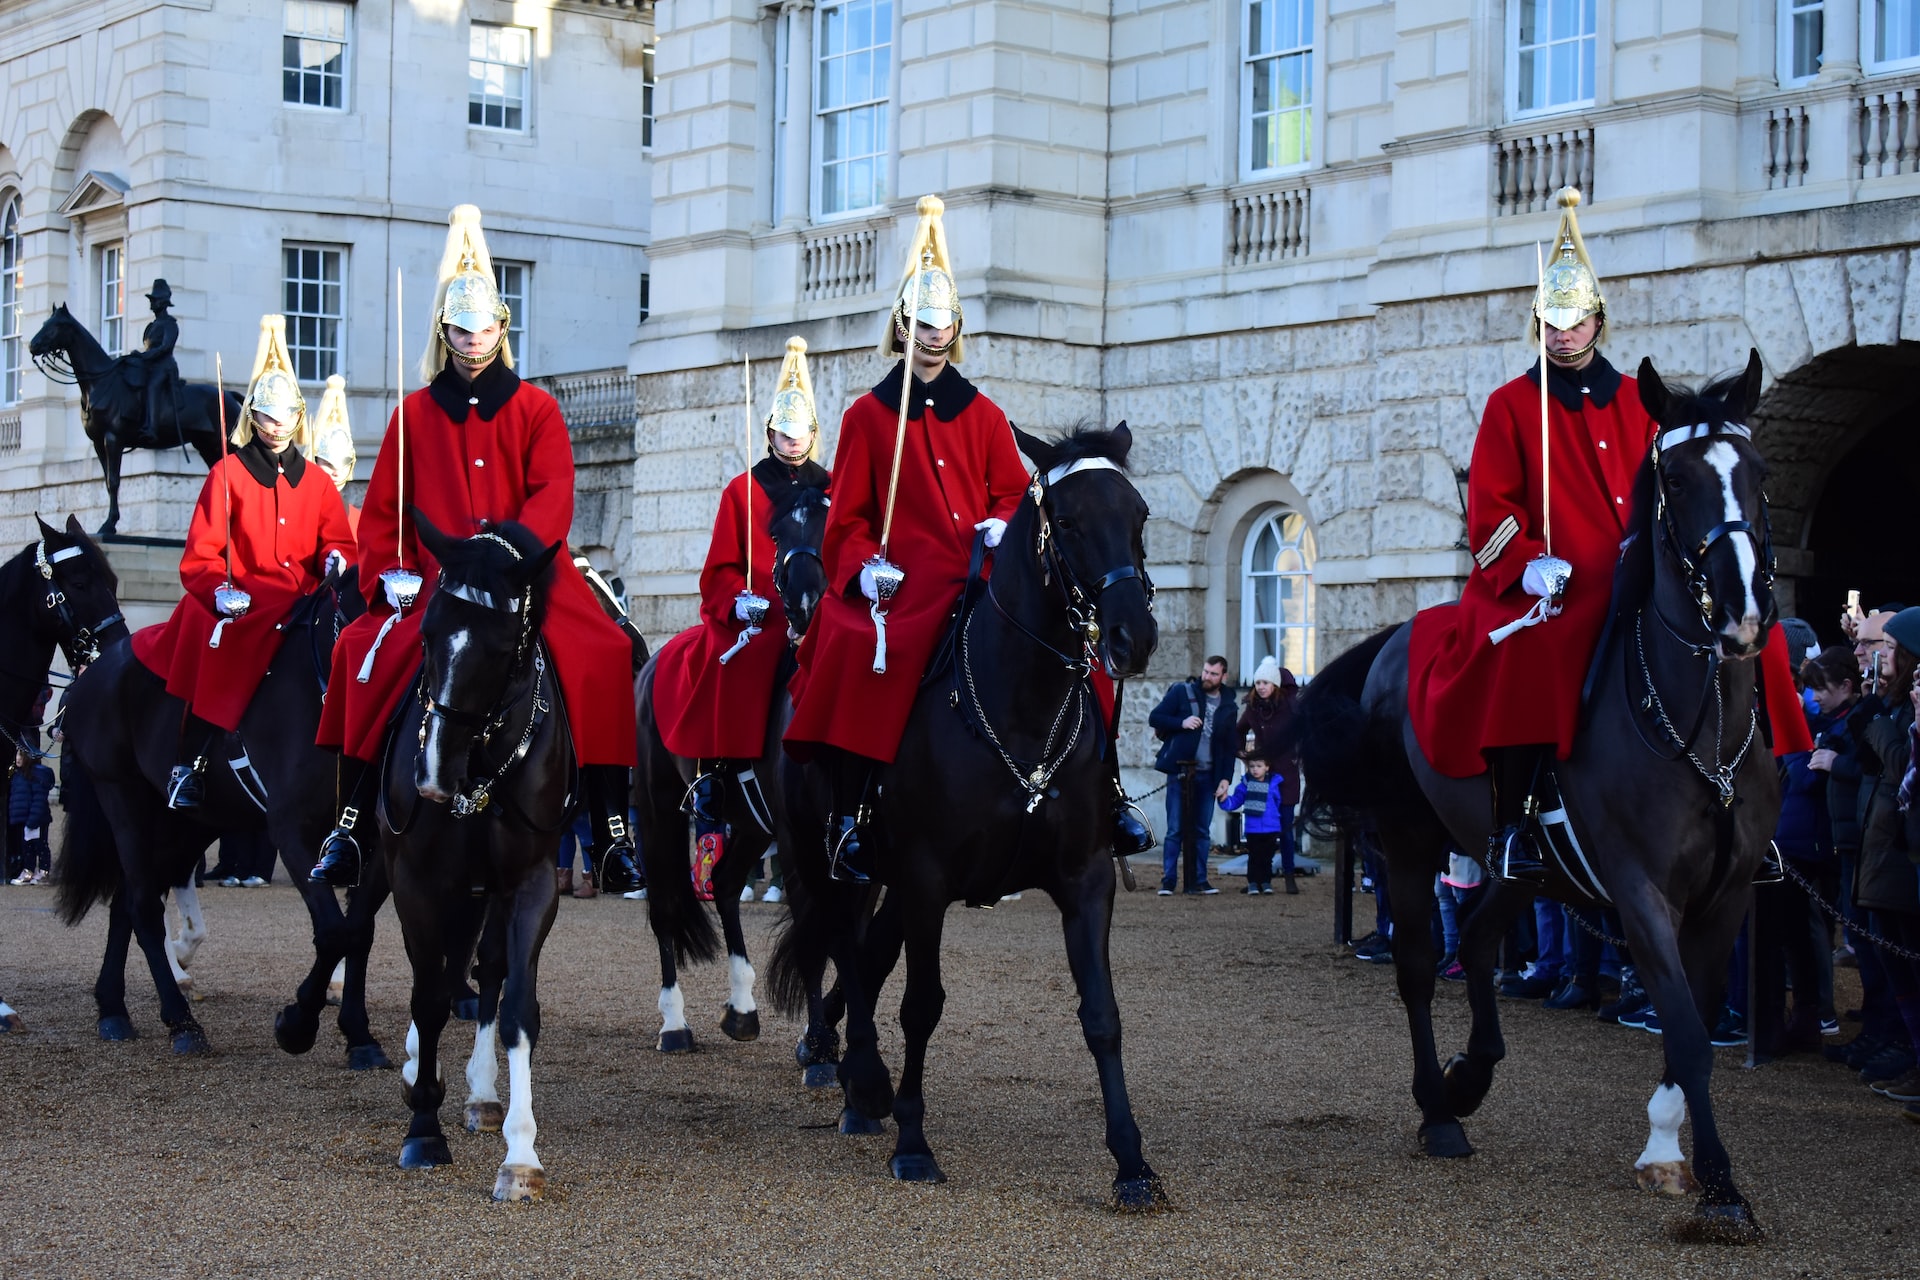 Guards mounted on horseback wearing traditional garb in front of Buckingham Palace.